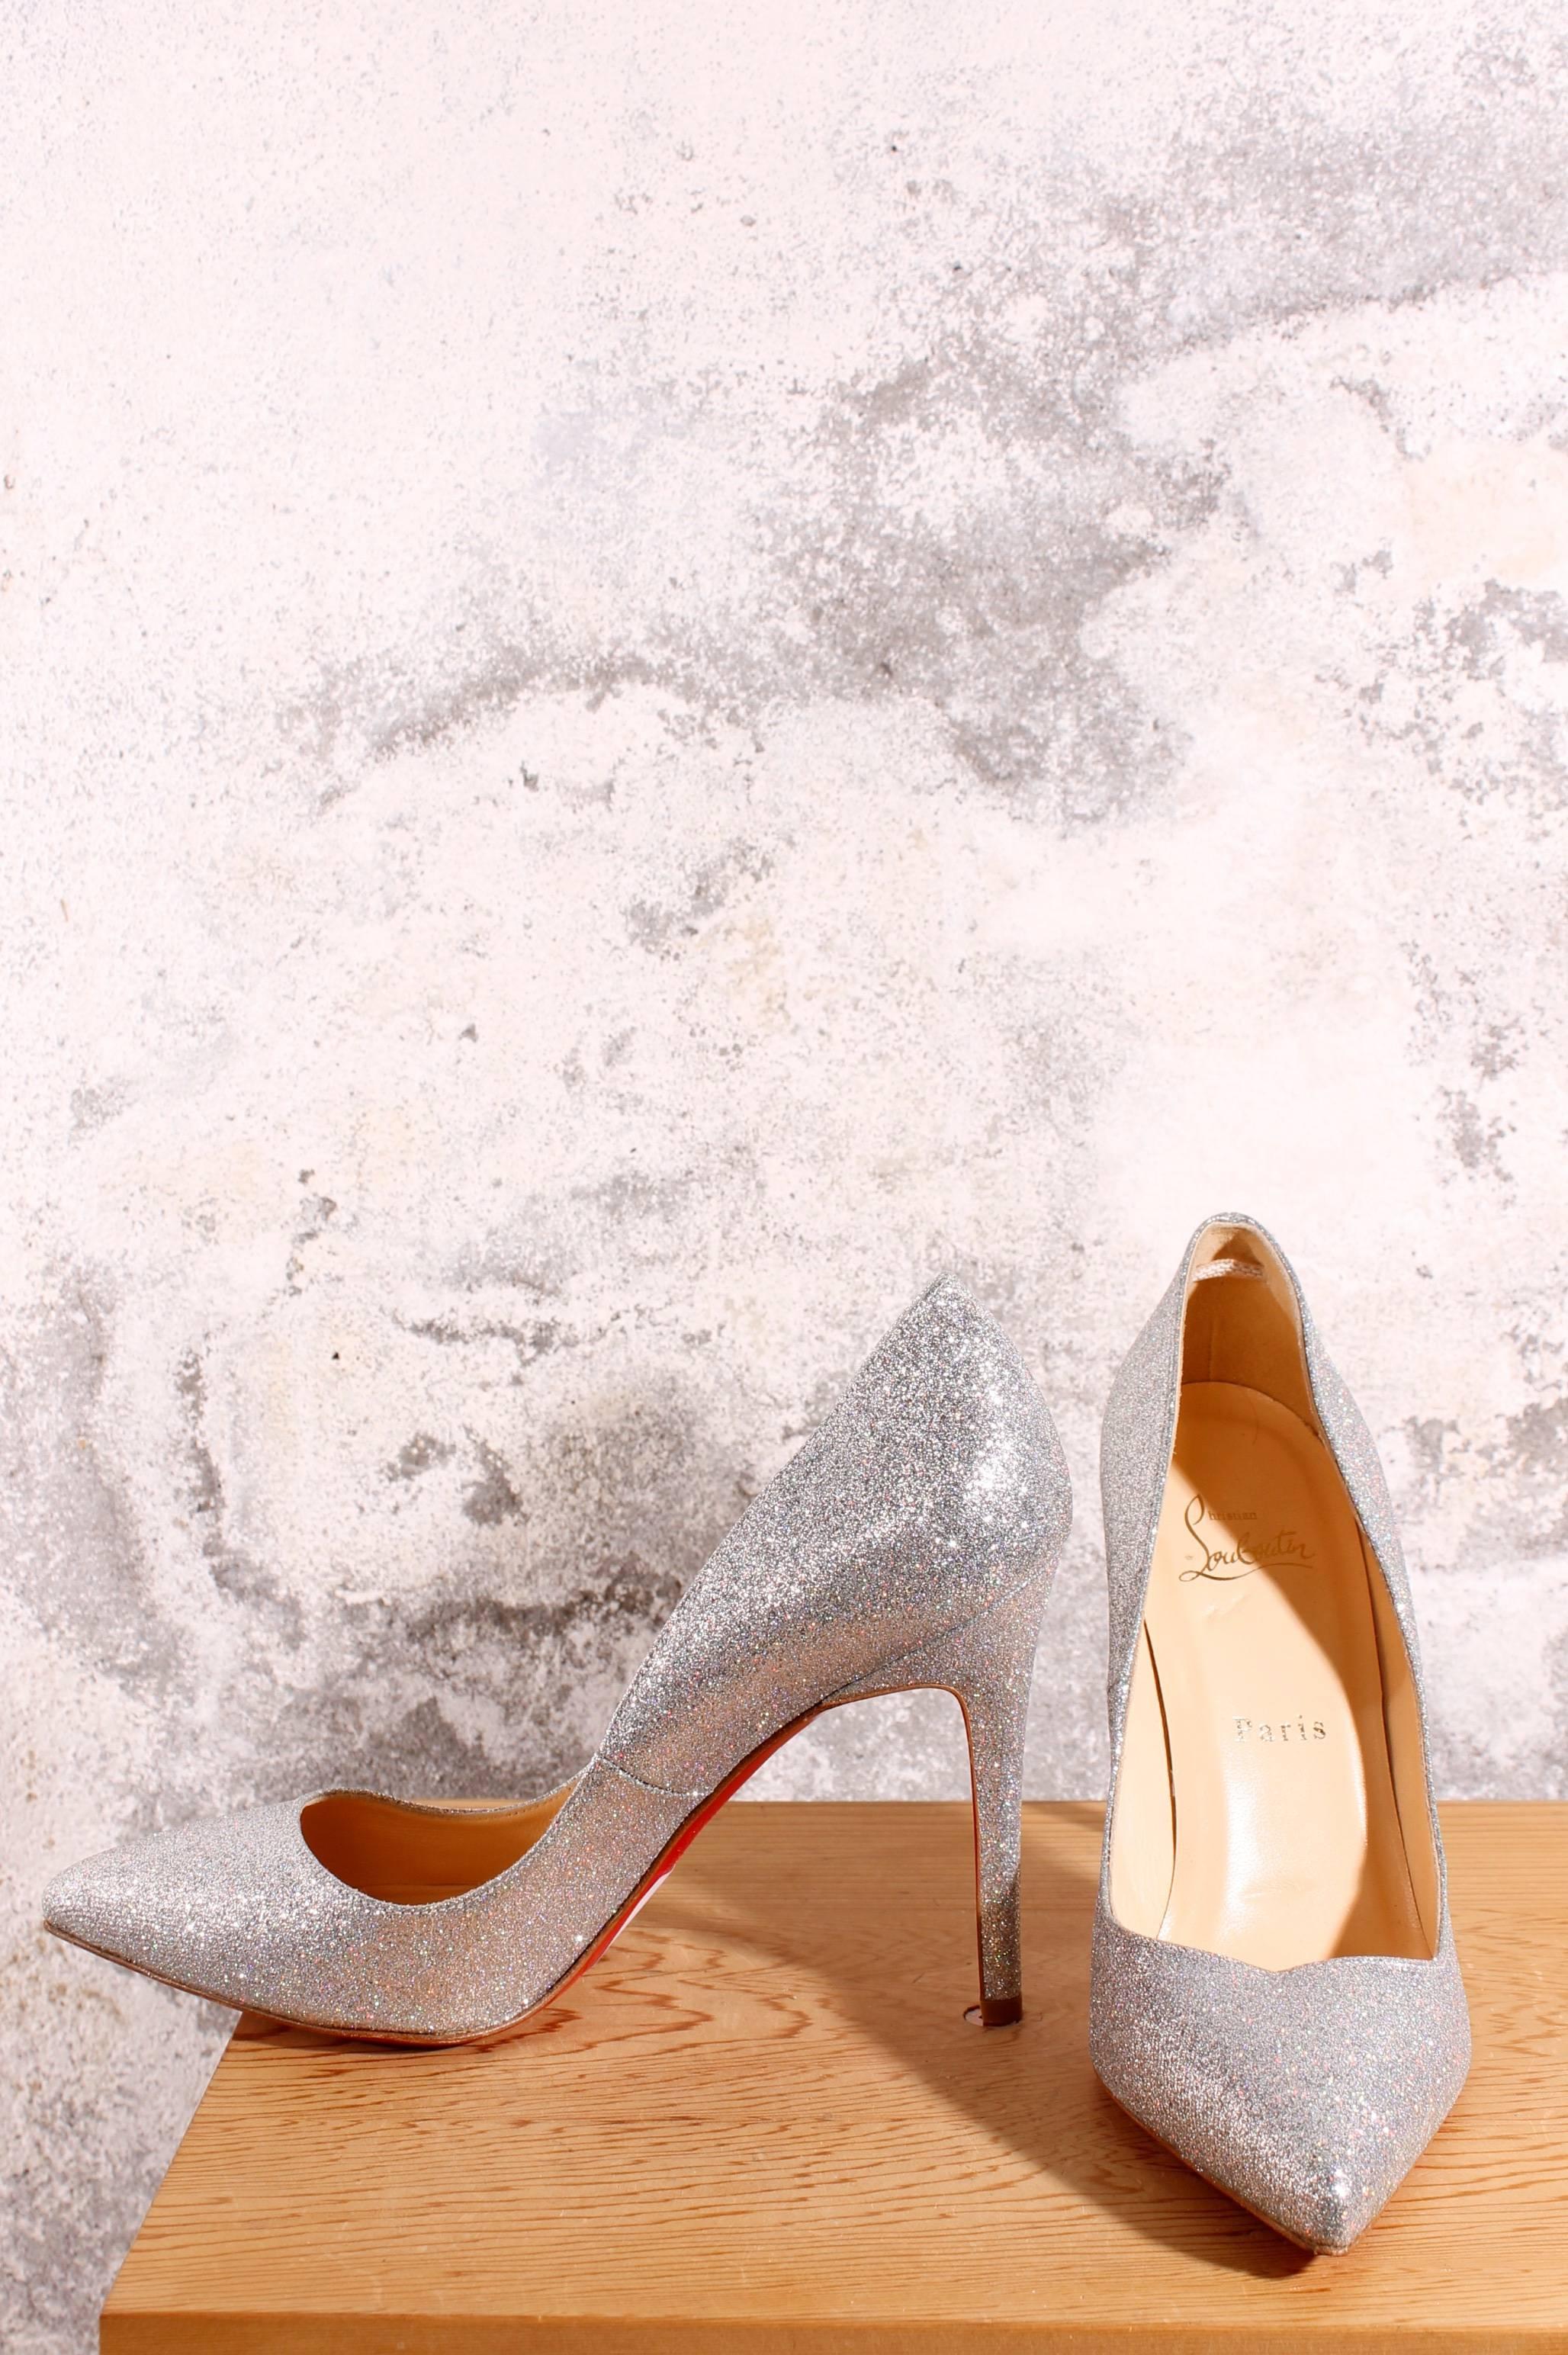 Shiny silver pumps by Christian Louboutin. This pair is new, has never been walked on before. Lining in nude-coloured leather. 
Heels are 10,5 centimeter high, pointed tip and fully covered with silver glitter. A little piece of elastic on the